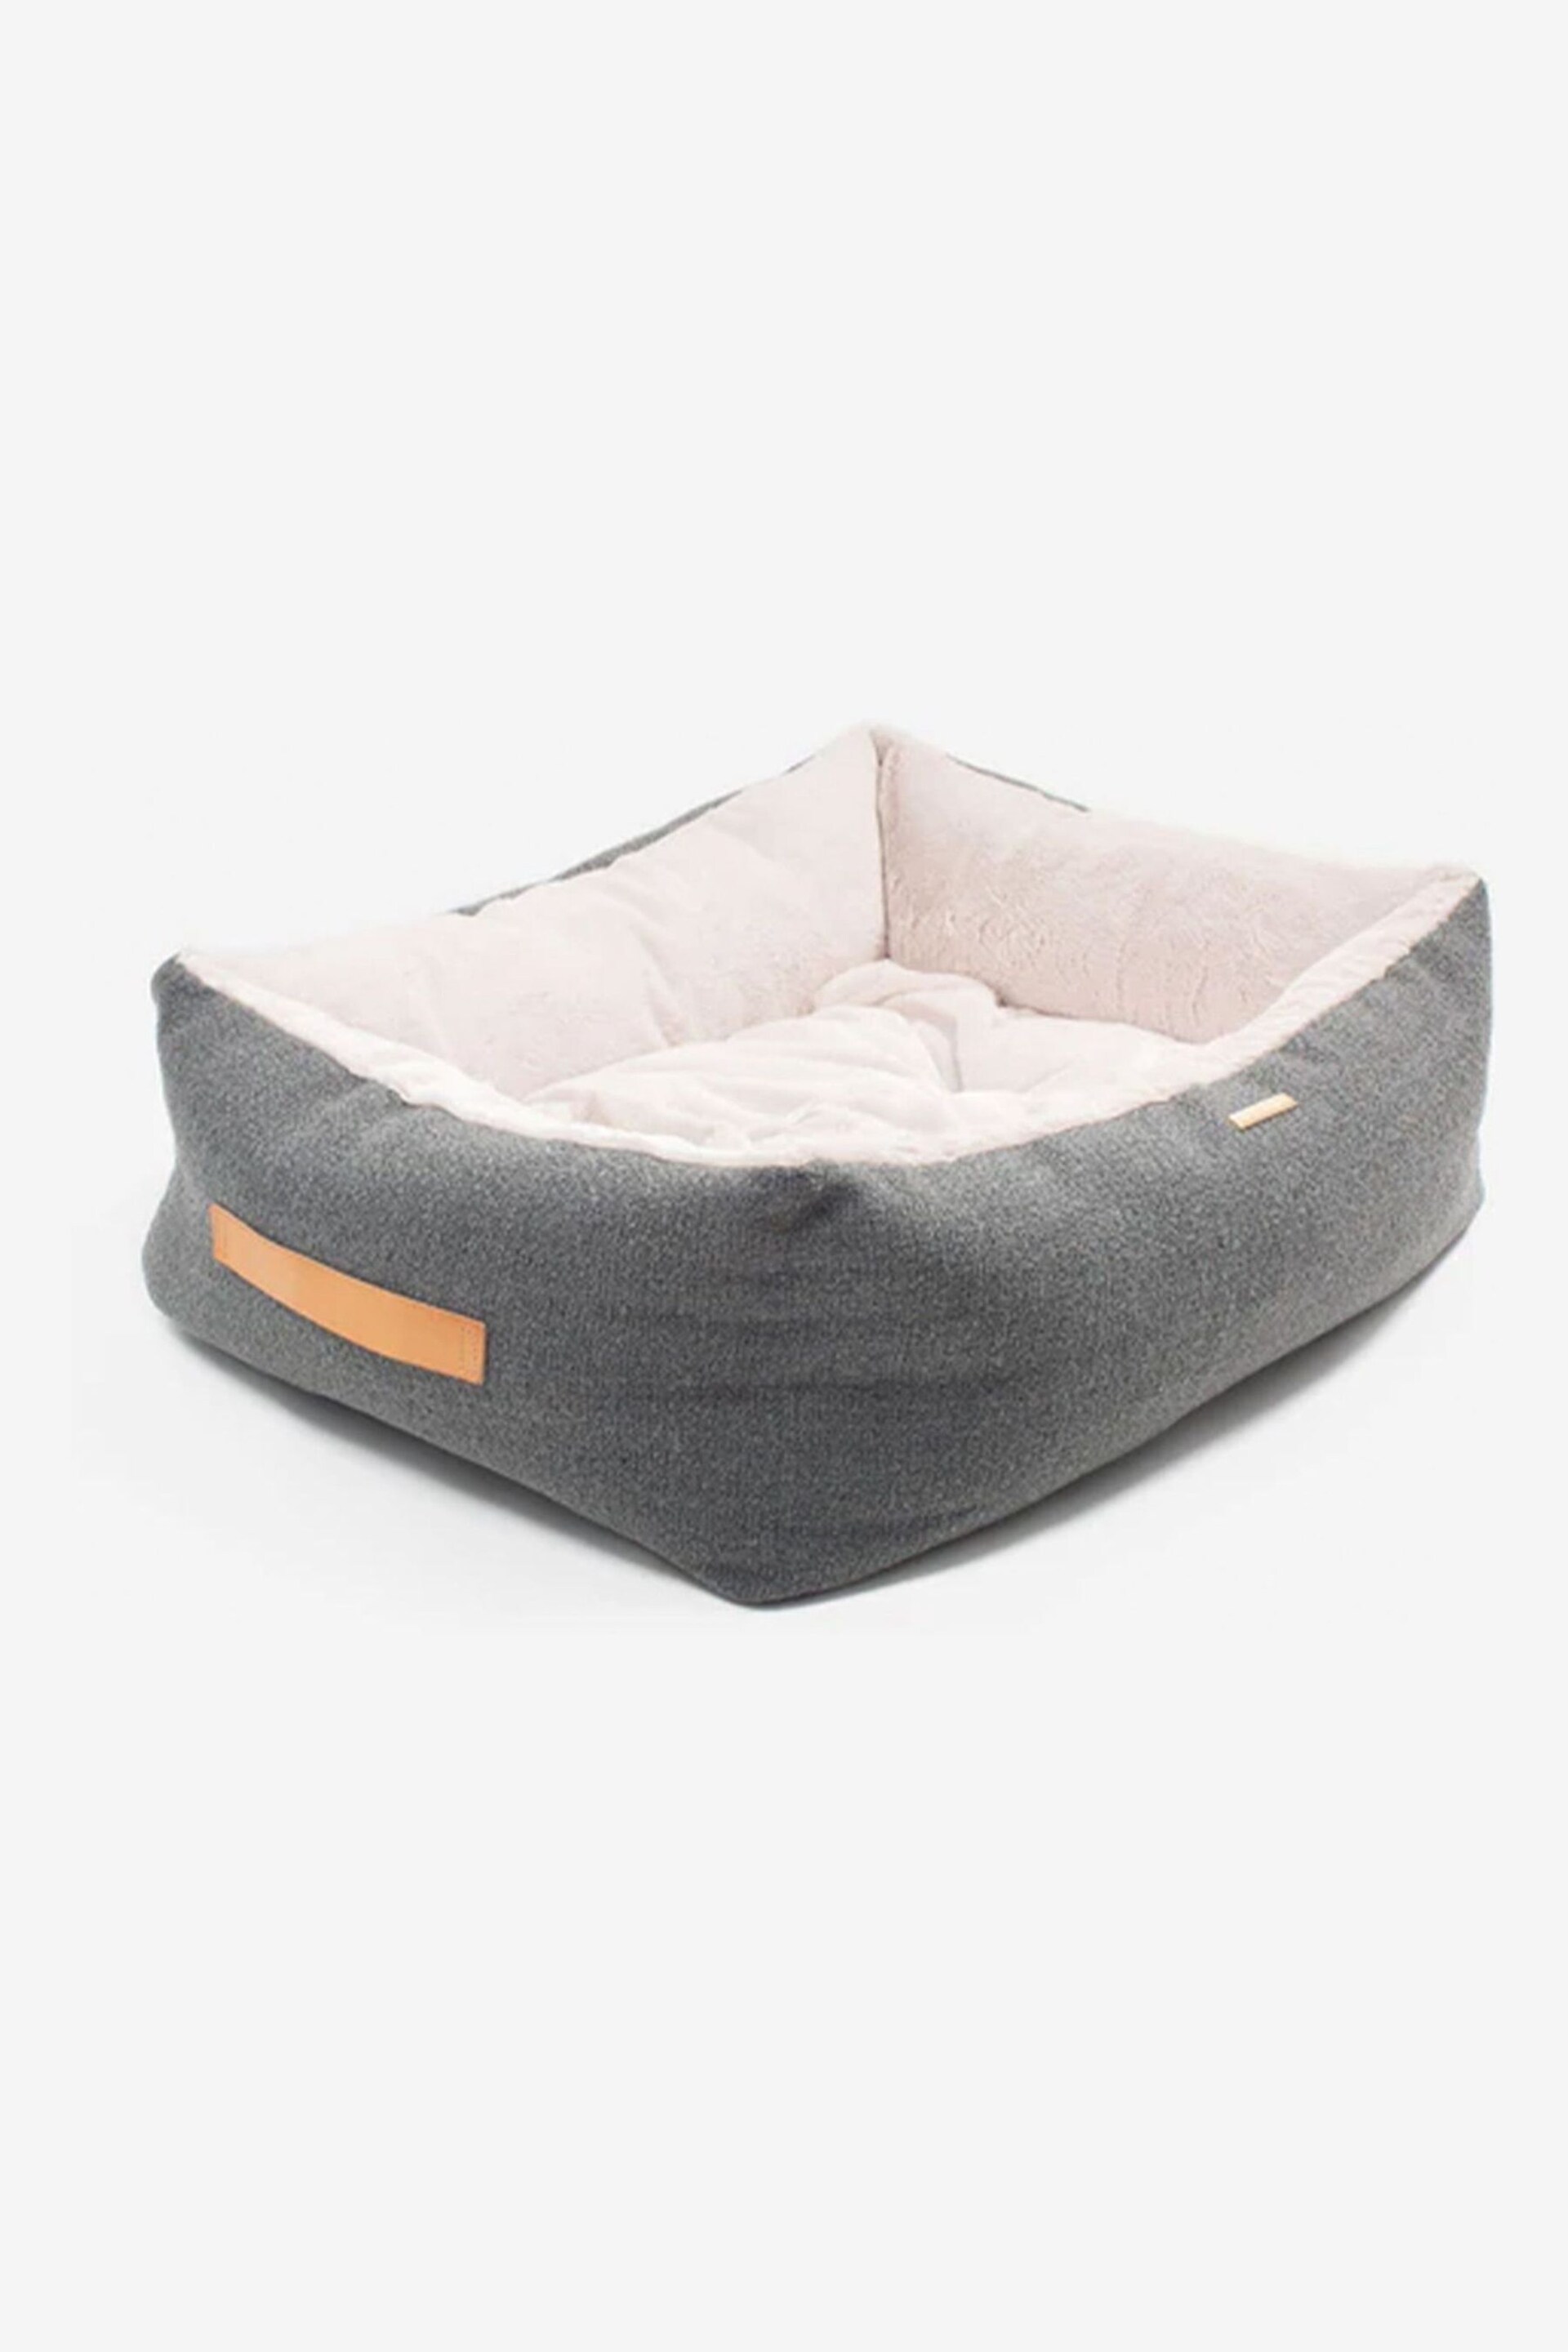 Lords and Labradors Grey Essentials Herdwick Dog Box Bed - Image 4 of 5